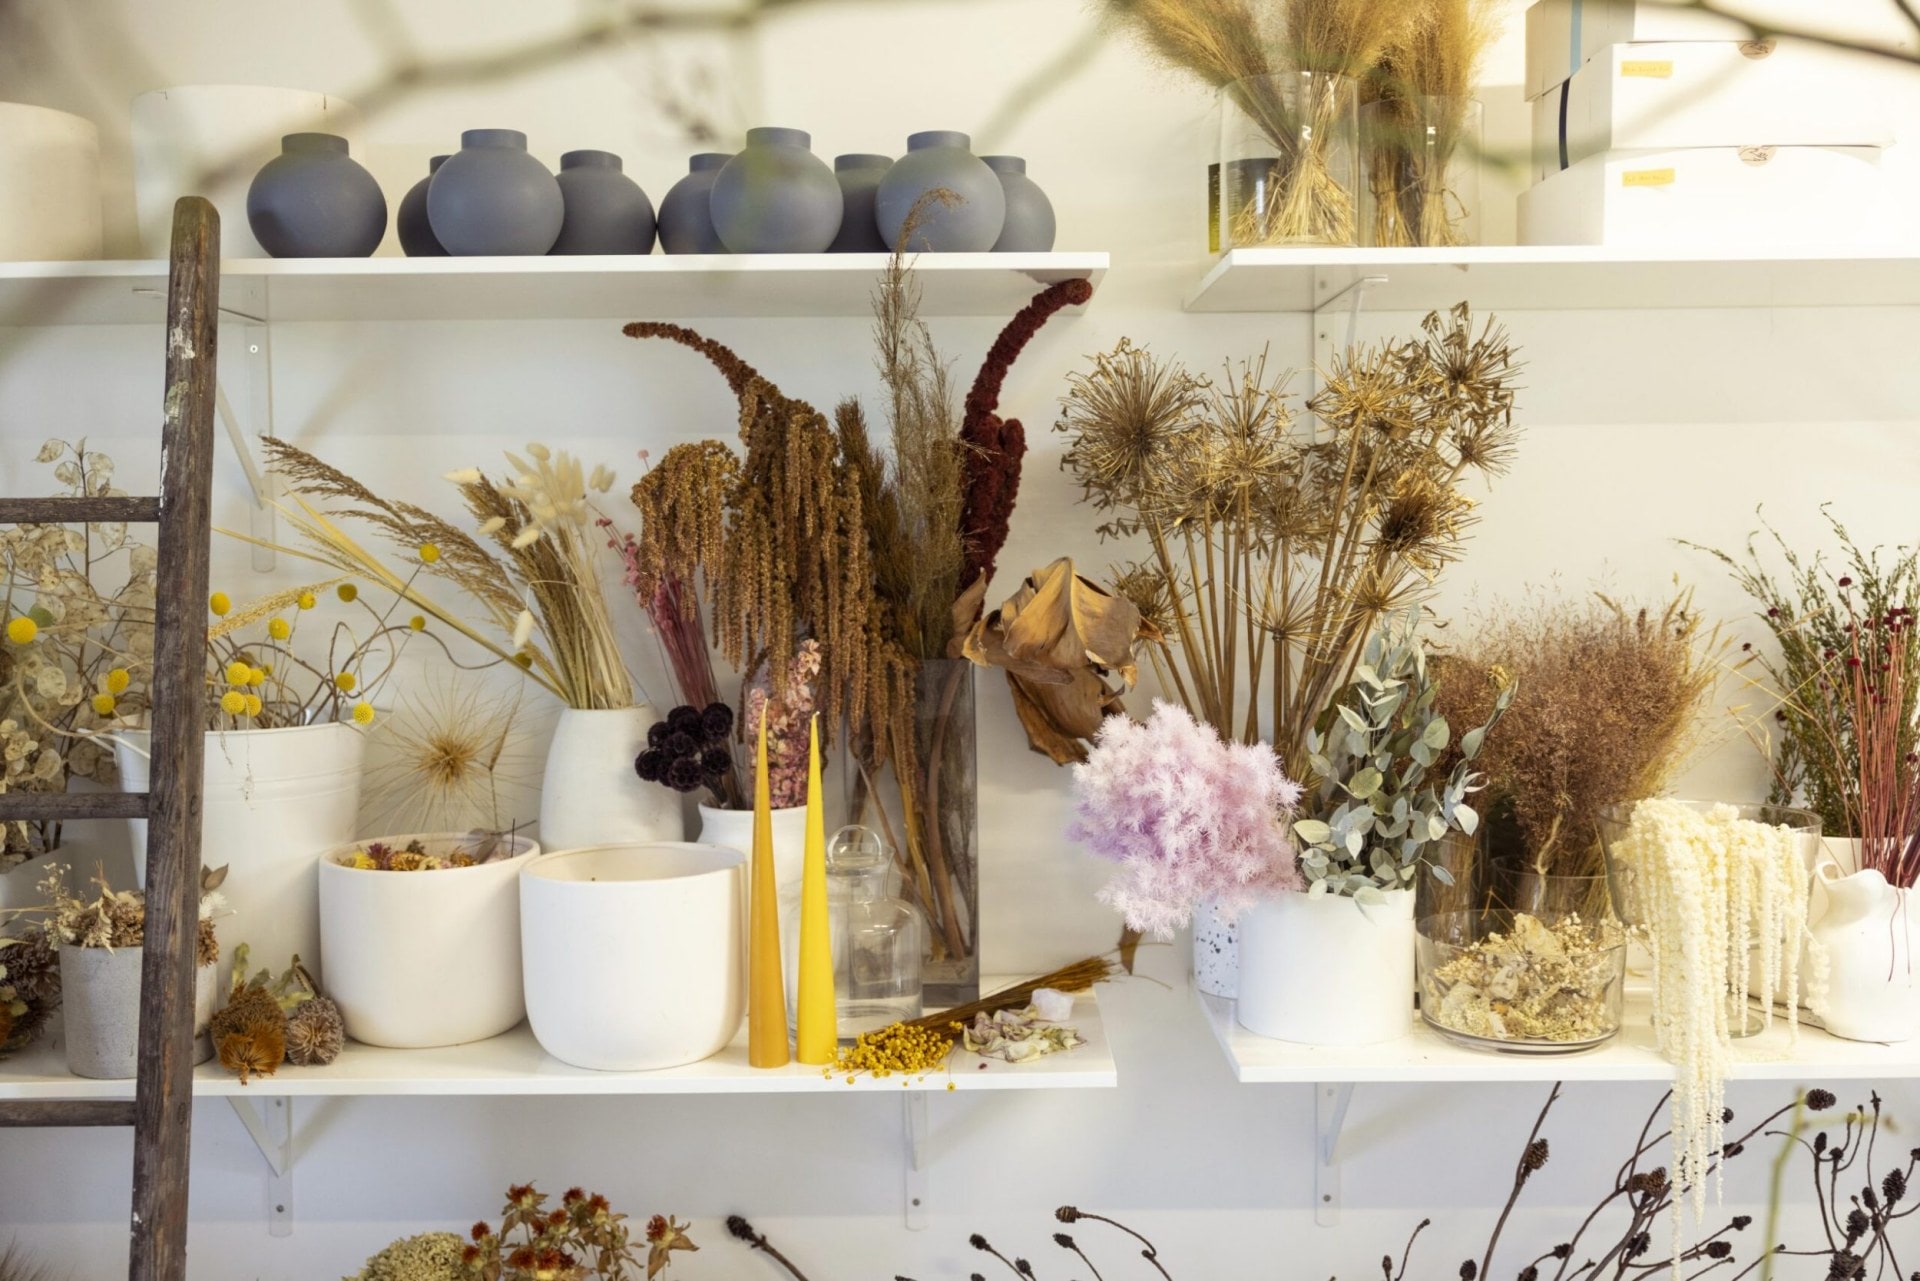 Shelves at a floral shop with white vases and dried flowers